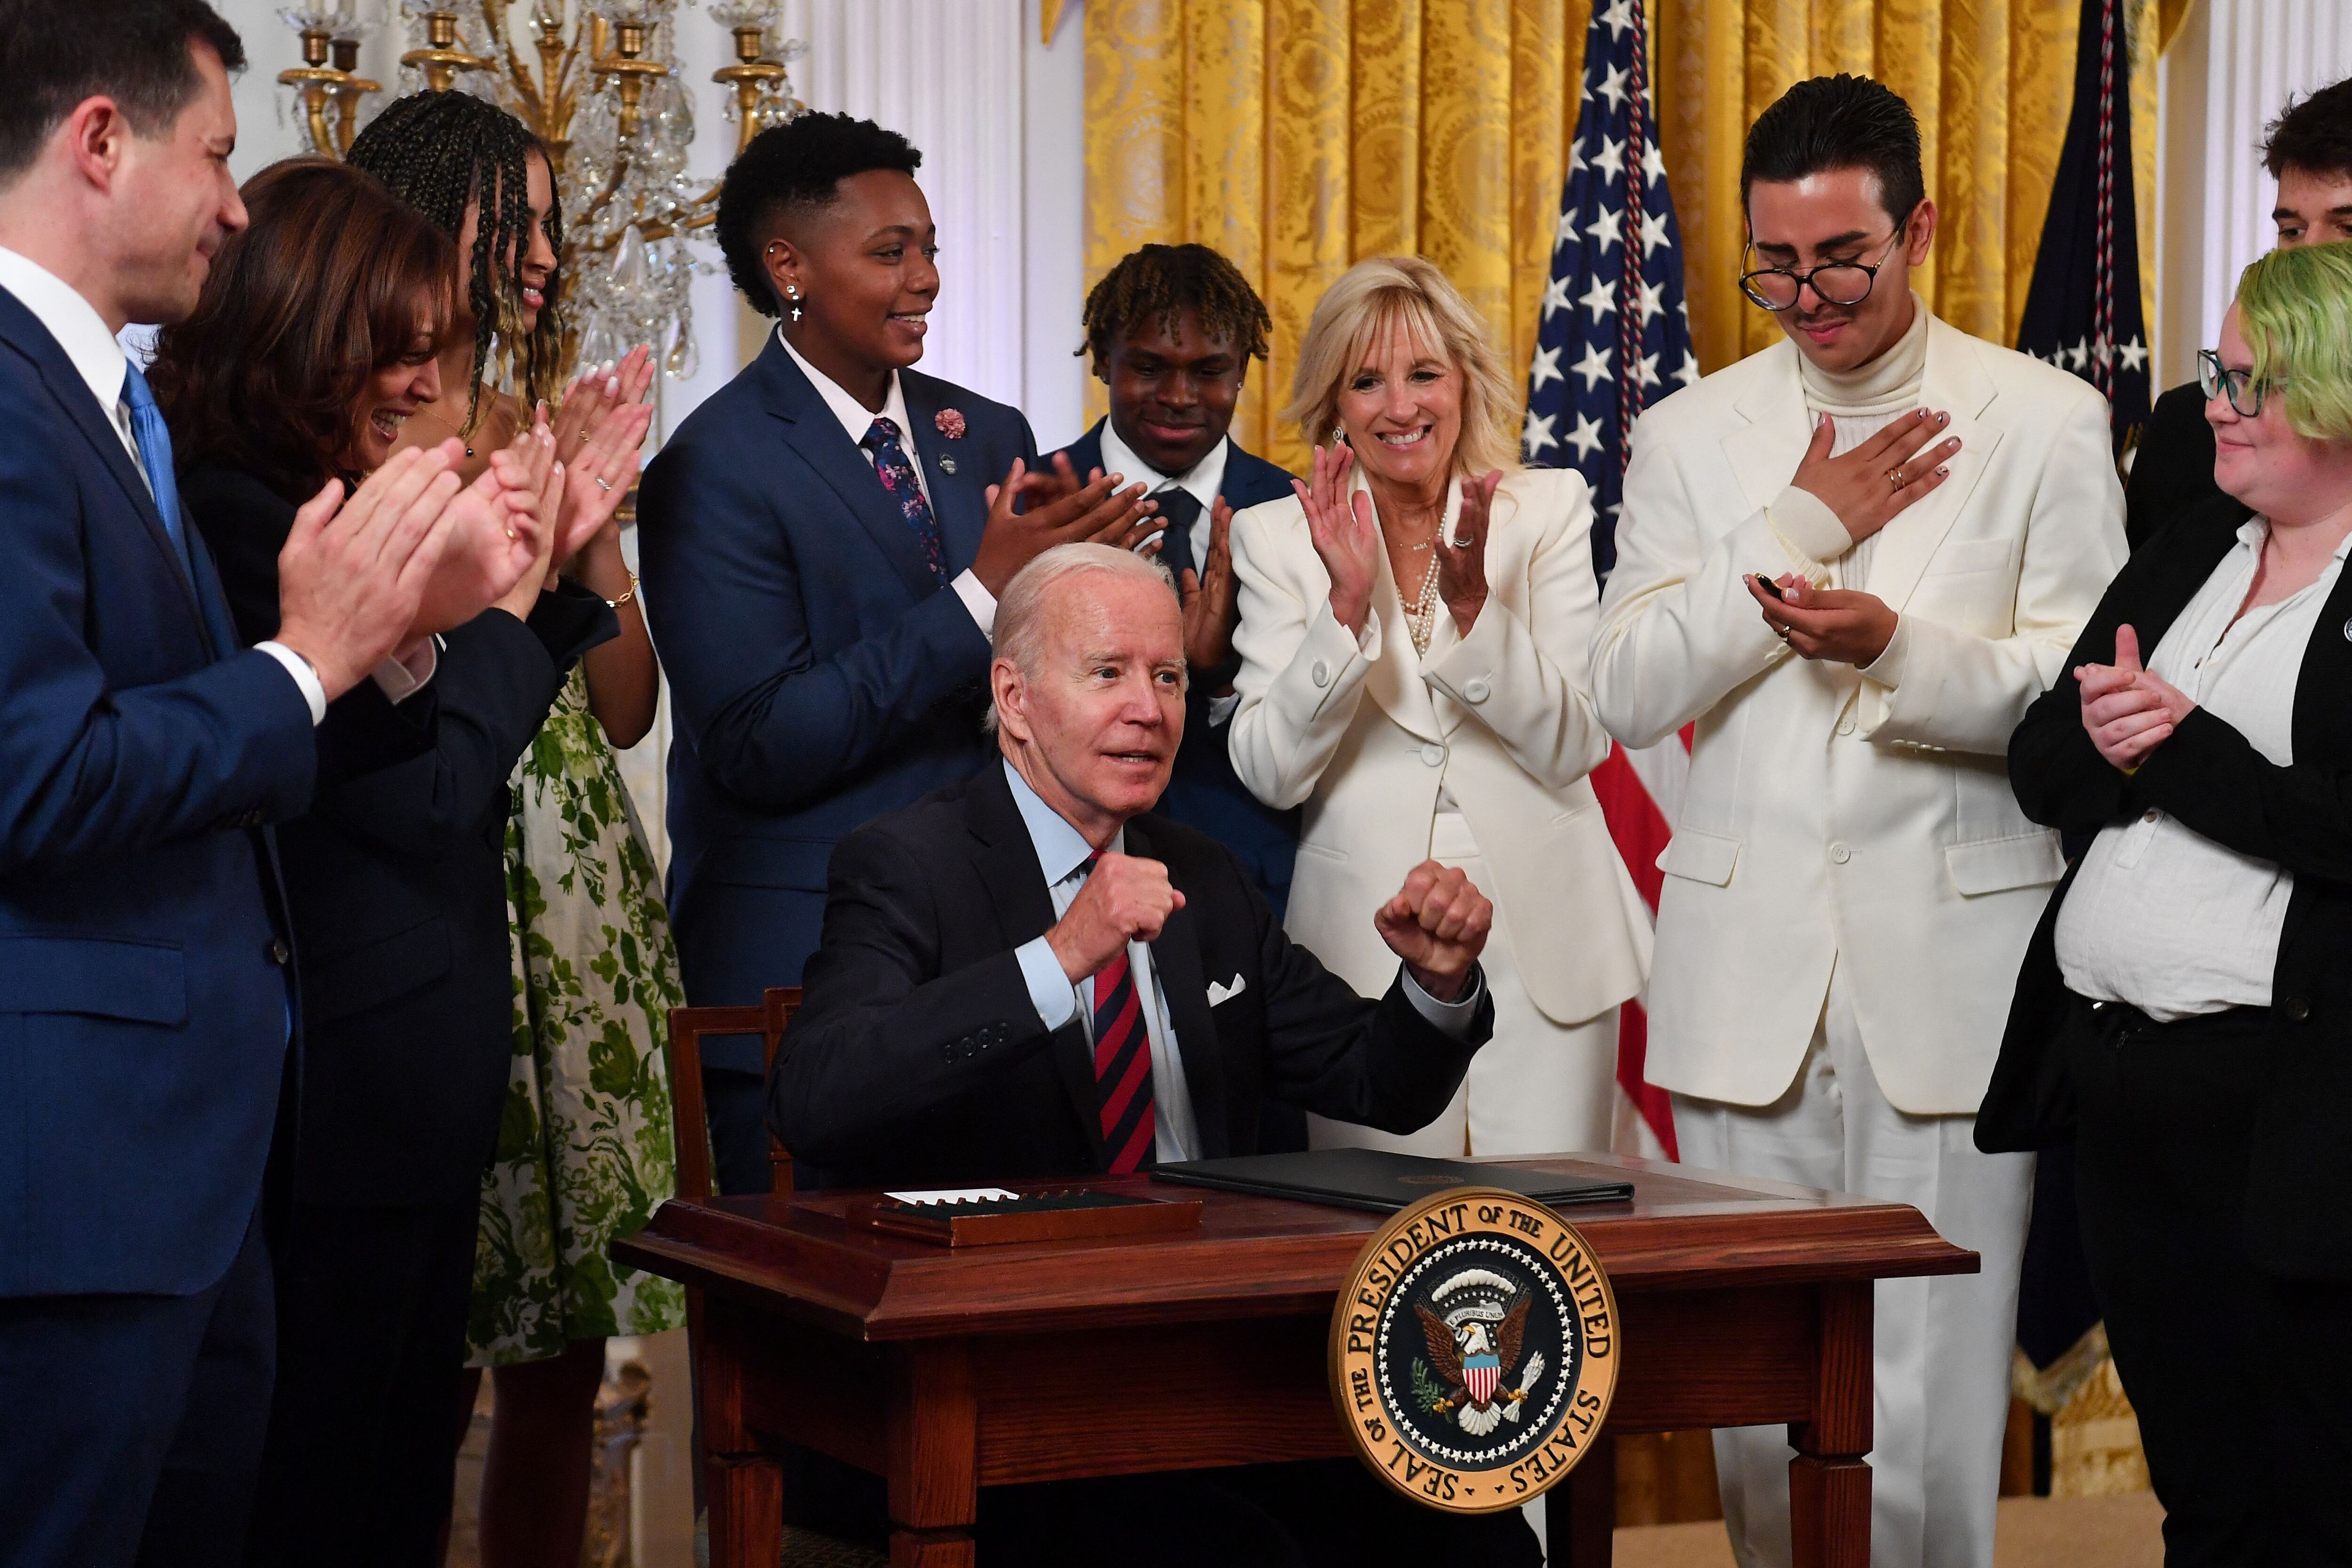 Supporters applaud during a White House ceremony this June after President Biden signs an executive order promoting LGBTQ rights.